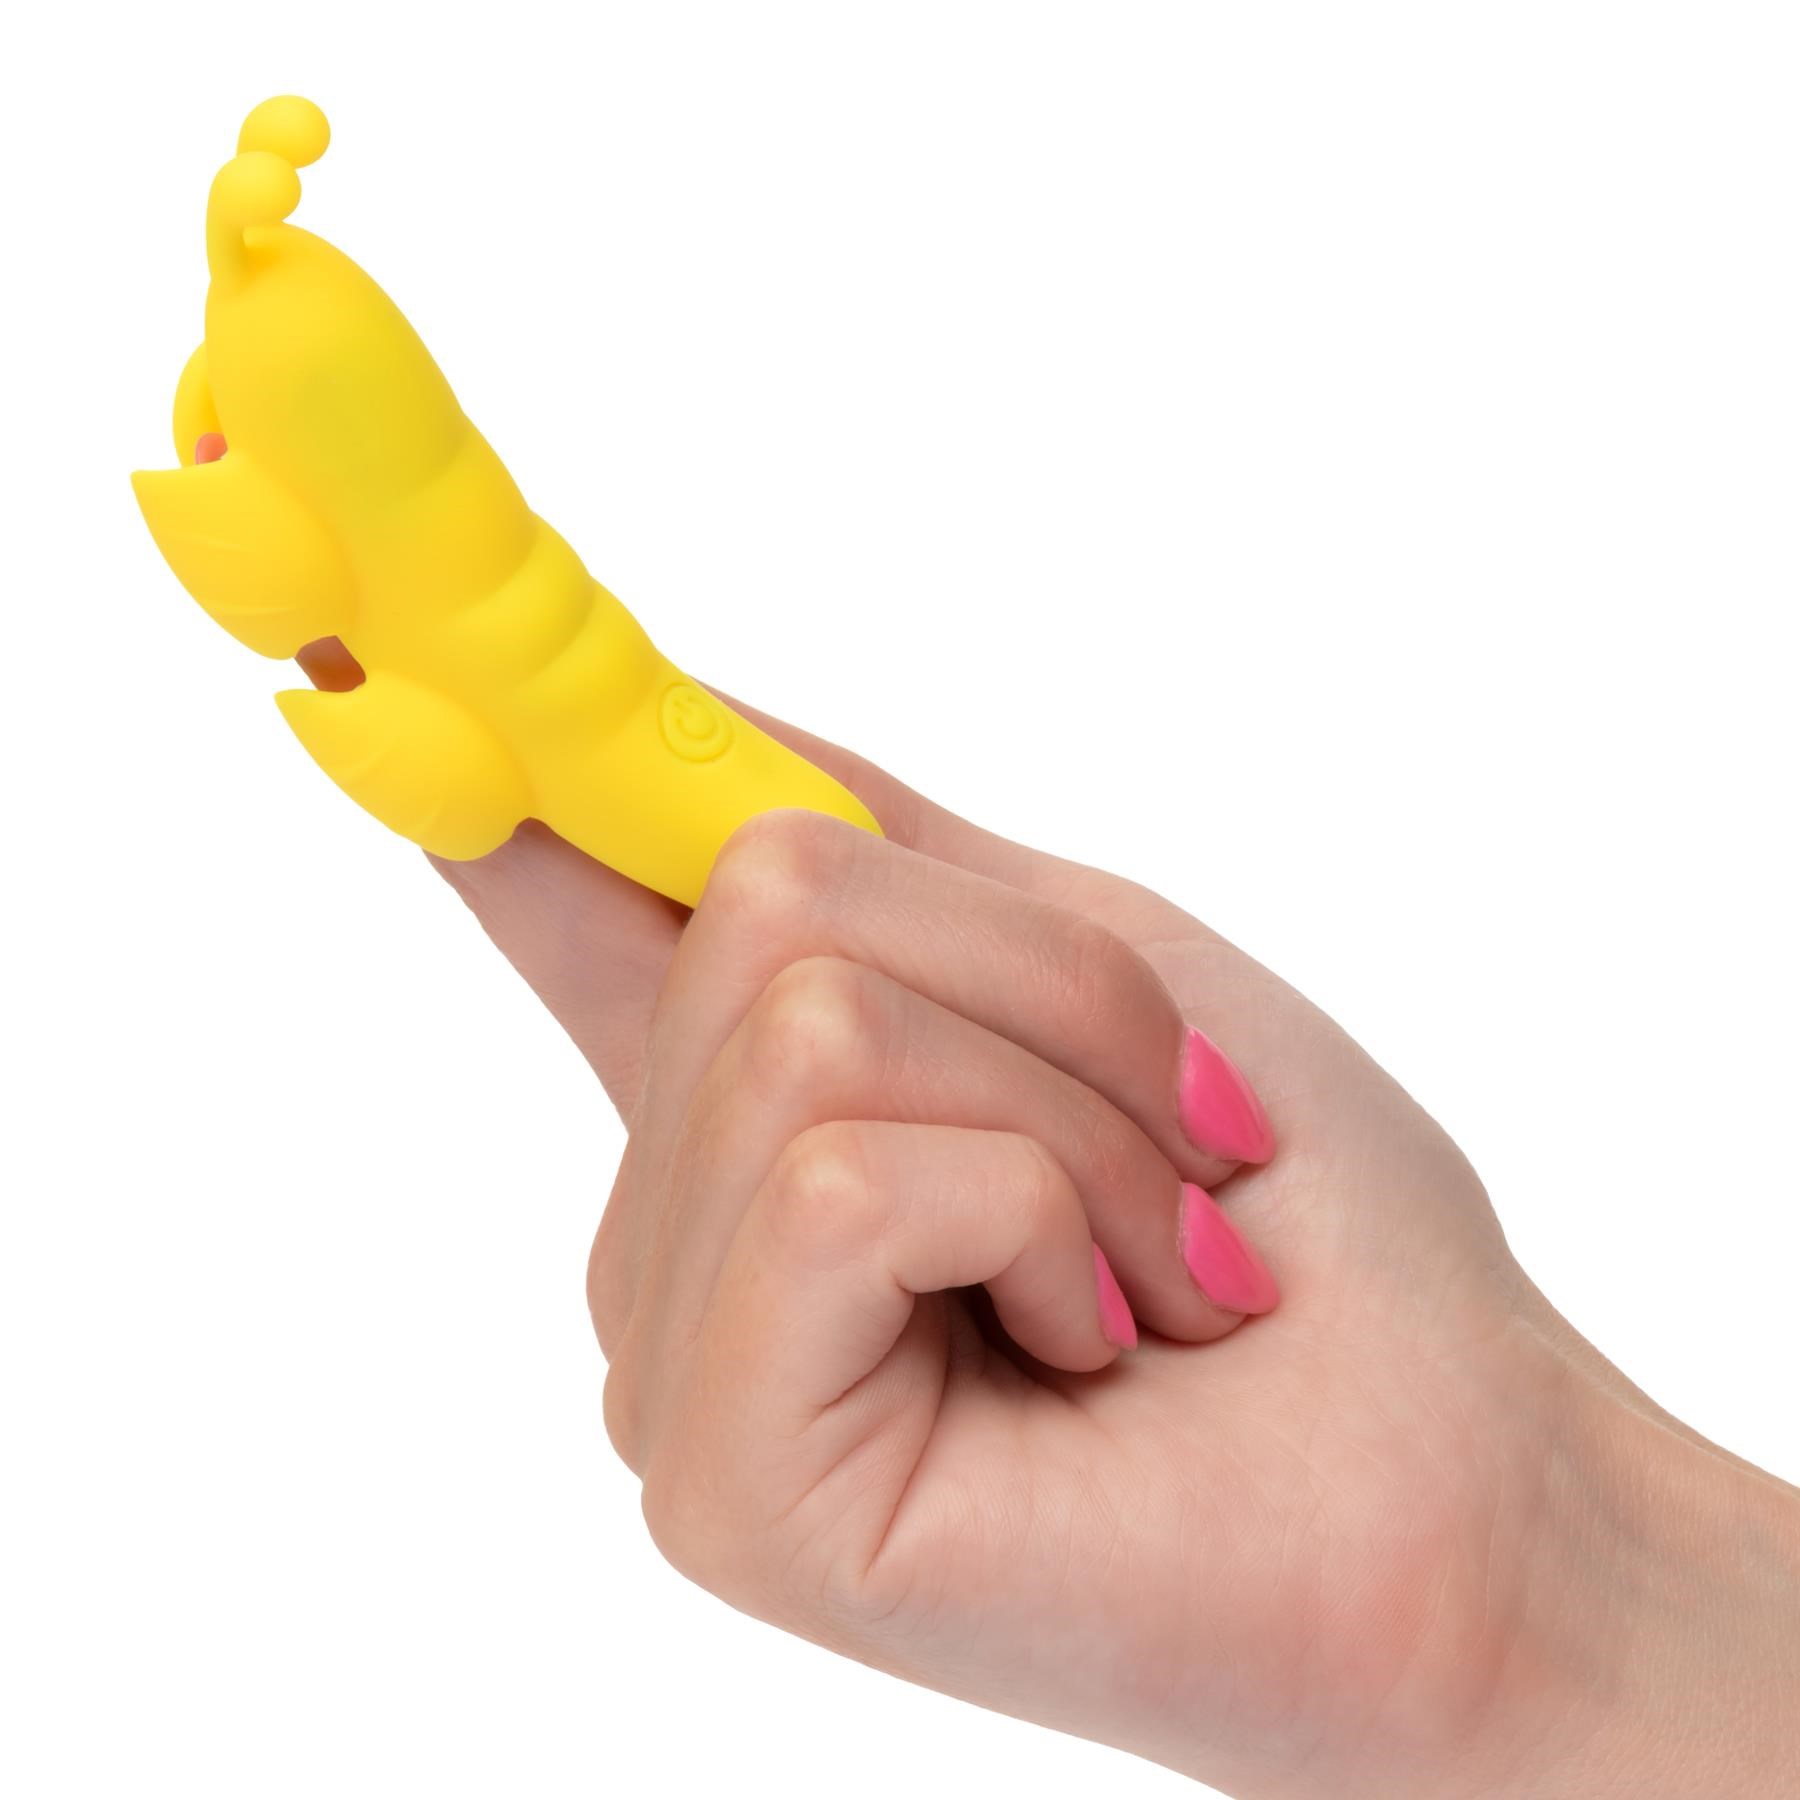 Neon Vibes The Butterfly Finger Vibrator- Hand Shot to Show Size and How it is Worn